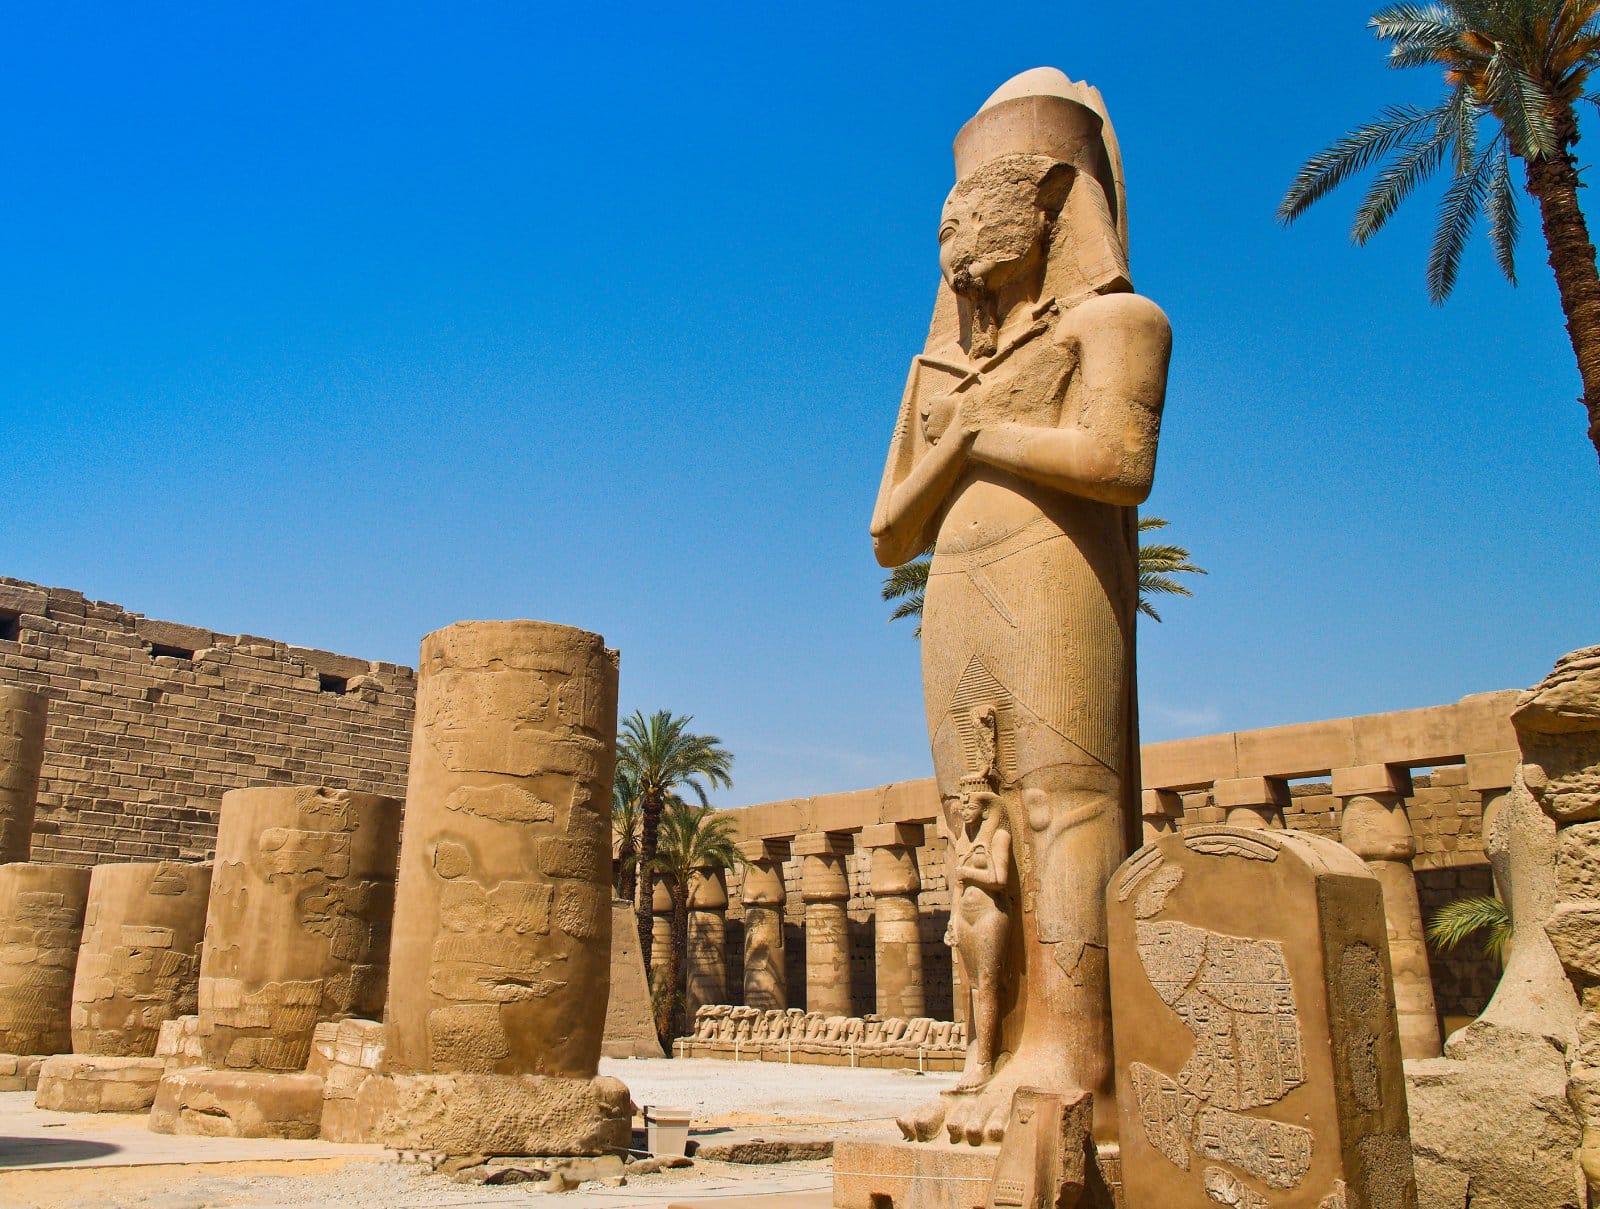 Image Credit: Shutterstock / Lisa-S <p>Historical sites in Egypt attract many visitors, but Brits are often criticised for their lack of respect for ancient monuments. Combined with security concerns, this has made British tourists less popular.</p>